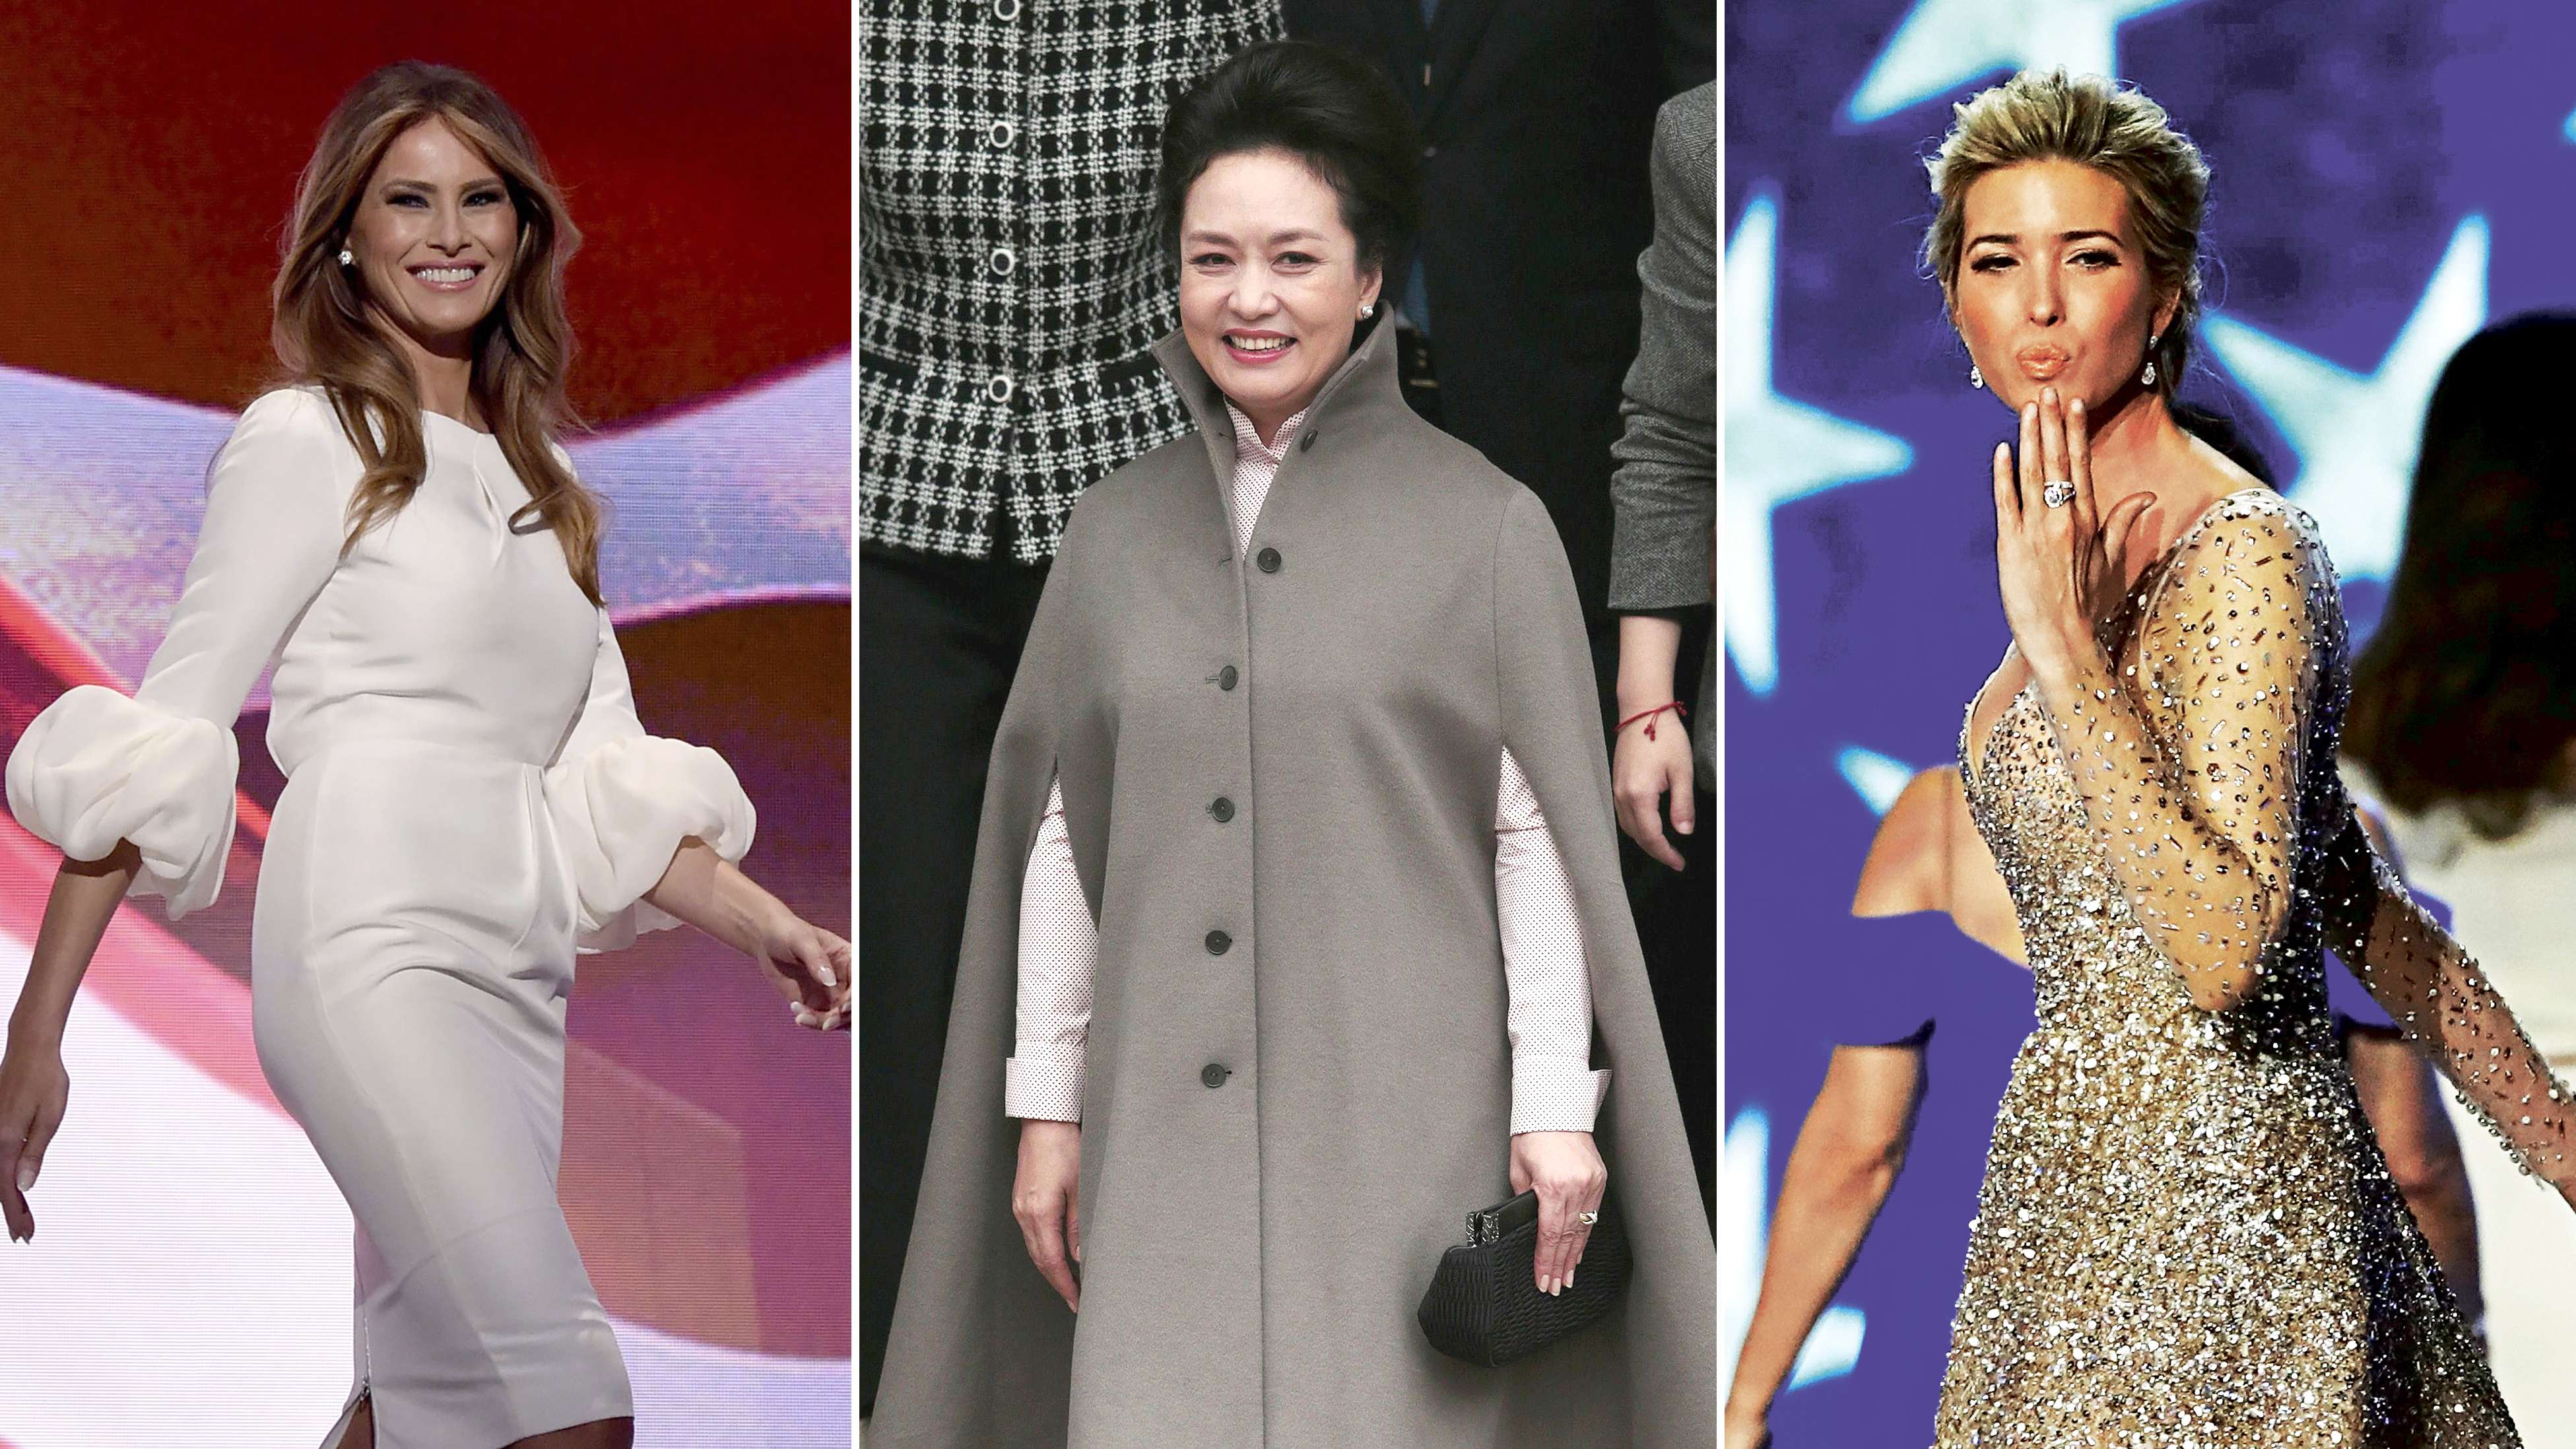 Style icons: US first lady Melania Trump, Chinese first lady Peng Liyuan and Assistant to the President Ivanka Trump. Photos: Reuters, AFP